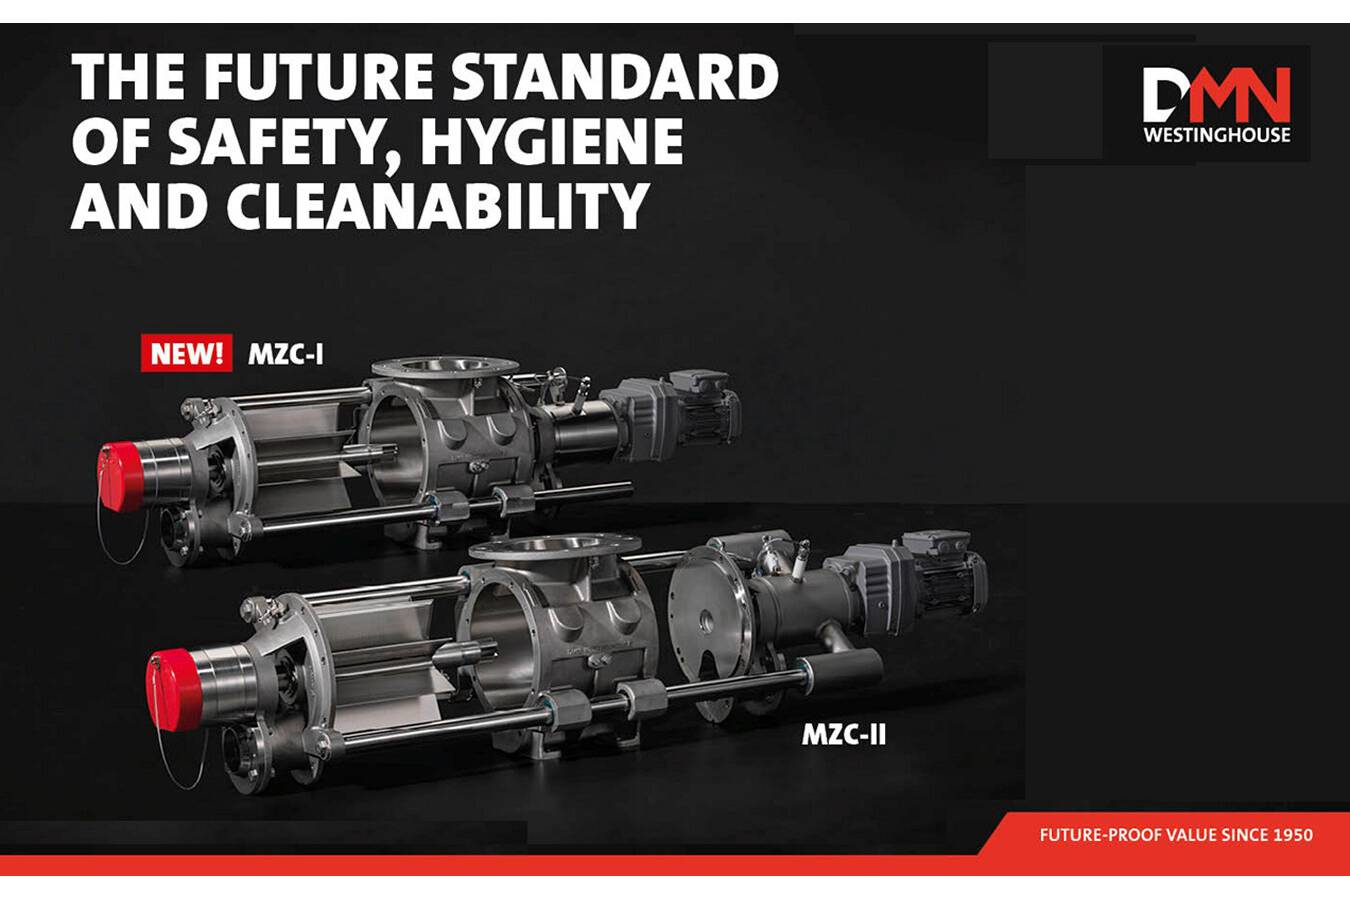 Rotary valves with easy access and safe cleanability The MZC-I and MZC-II rotary valves from DMN-Westinghouse  represent the new standard of easy and safe cleanability to reach an extreme level of hygiene.